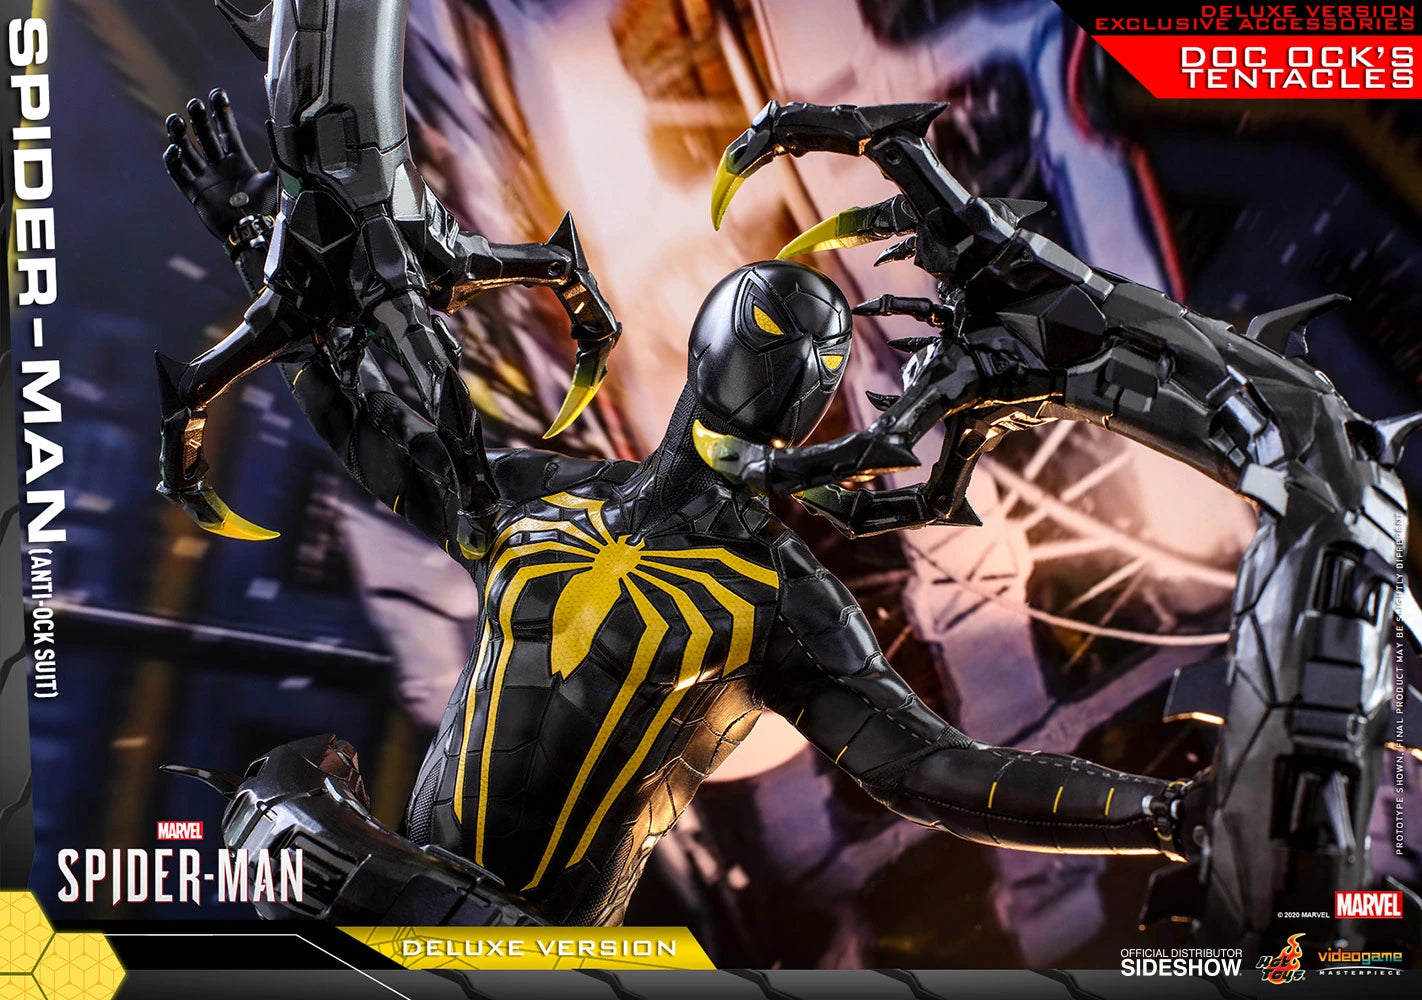 HOT TOYS MARVEL SPIDER-MAN SPIDER-MAN (ANTI-OCK SUIT) (DELUXE VERSION) 1/6 VGM45 - Anotoys Collectibles